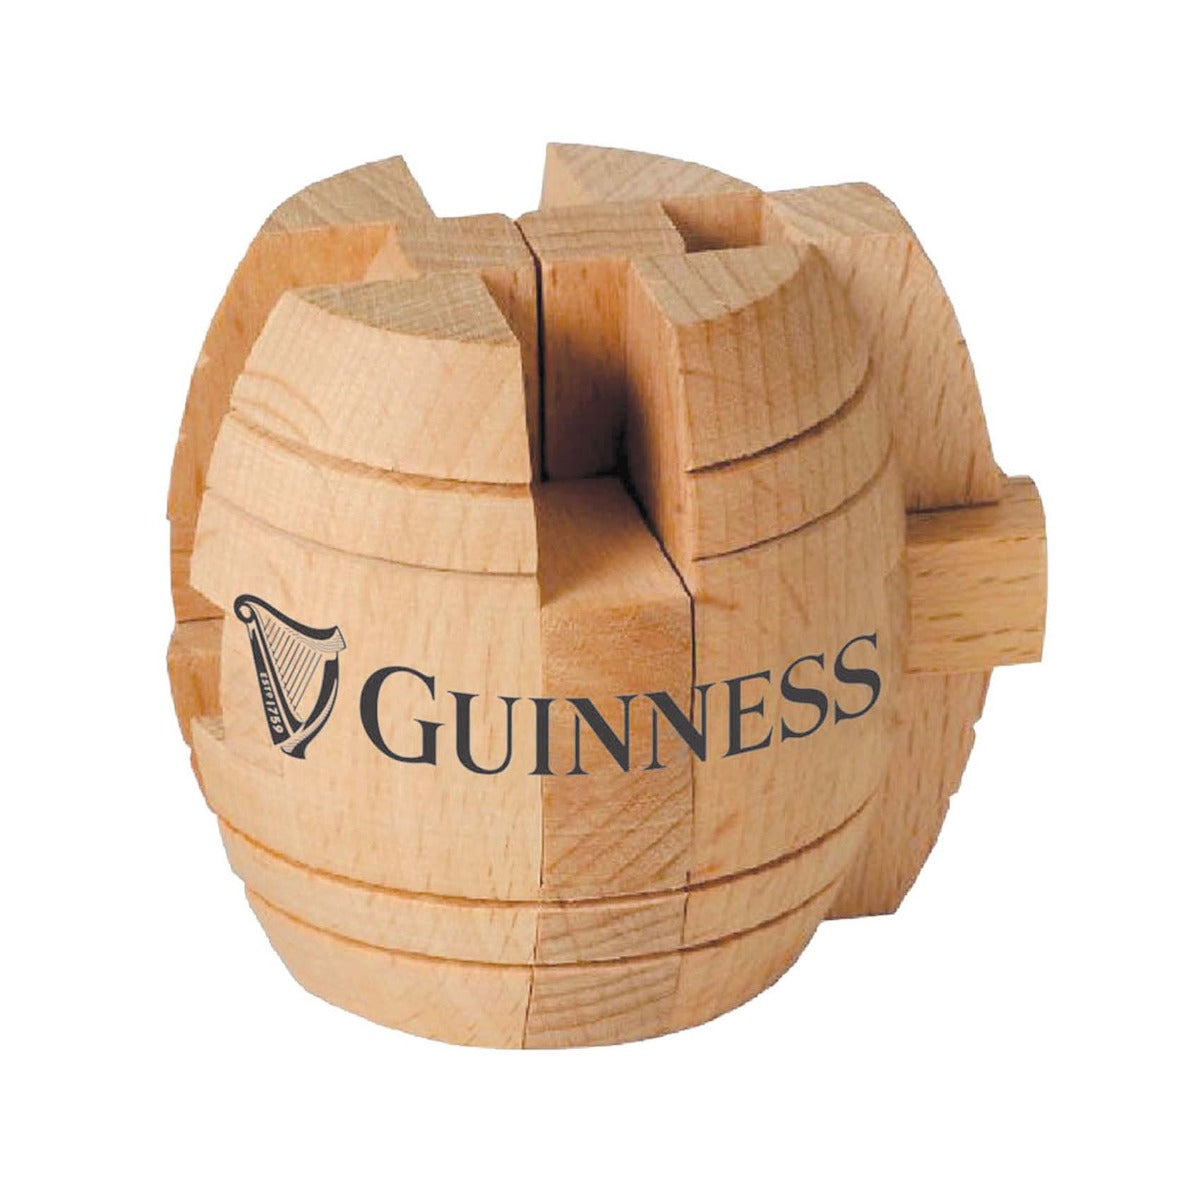 Guinness Wooden Barrel Puzzle Game